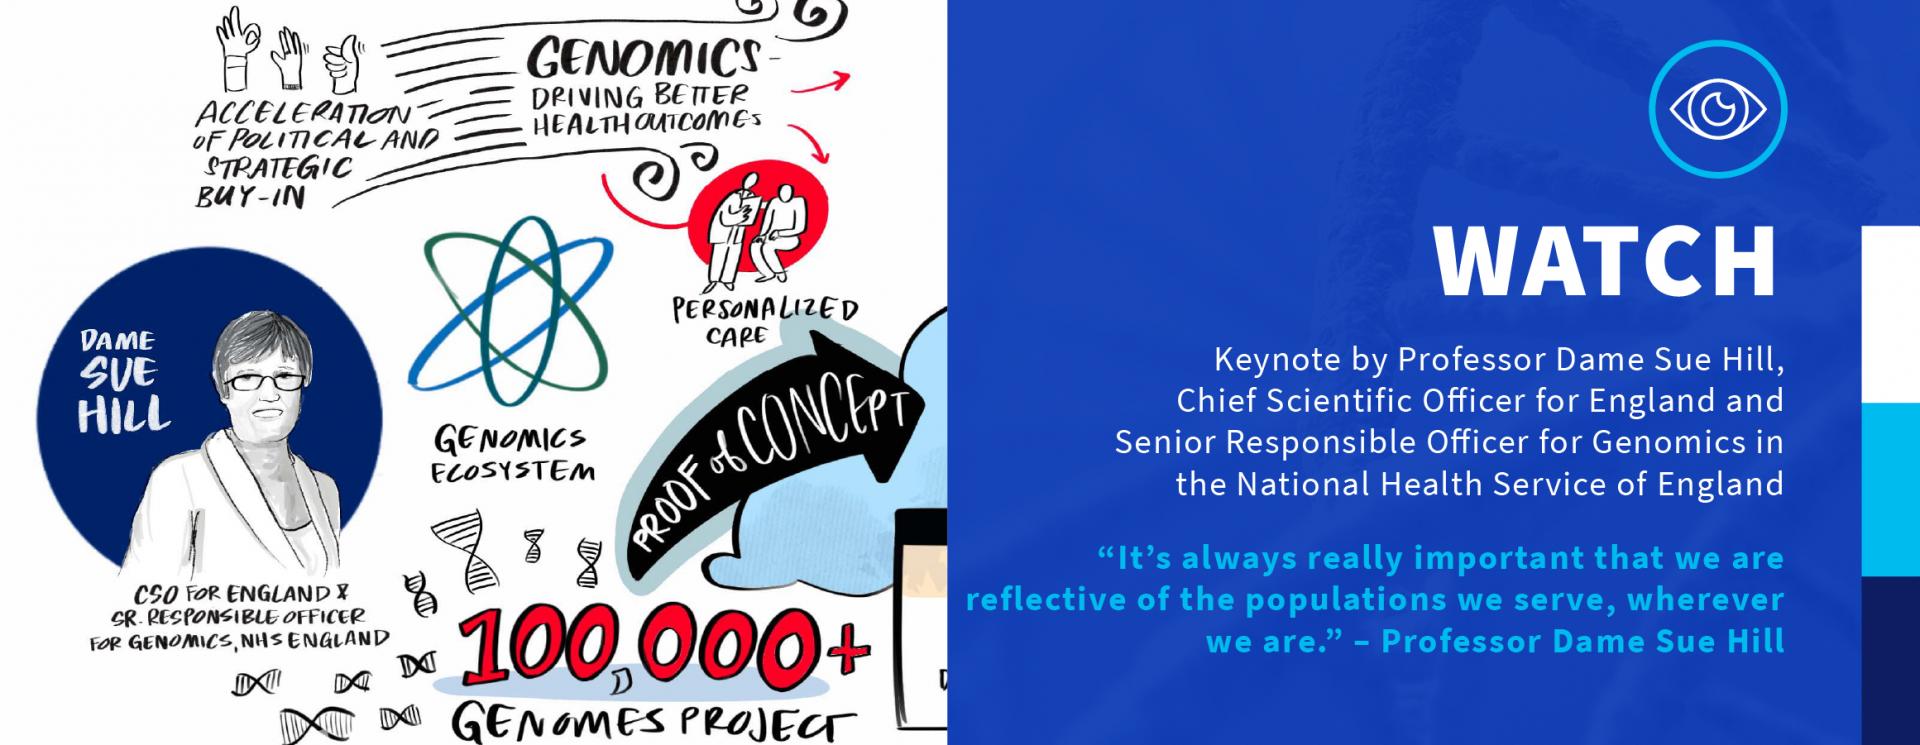 Watch – Keynote by Professor Dame Sue Hill, Chief Scientific Officer for England, and Senior Responsible Officer for Genomics in the National Health Service of England. “It’s always really important that we are reflective of the populations we serve, wherever we are.” – Professor Dame Sue Hill 